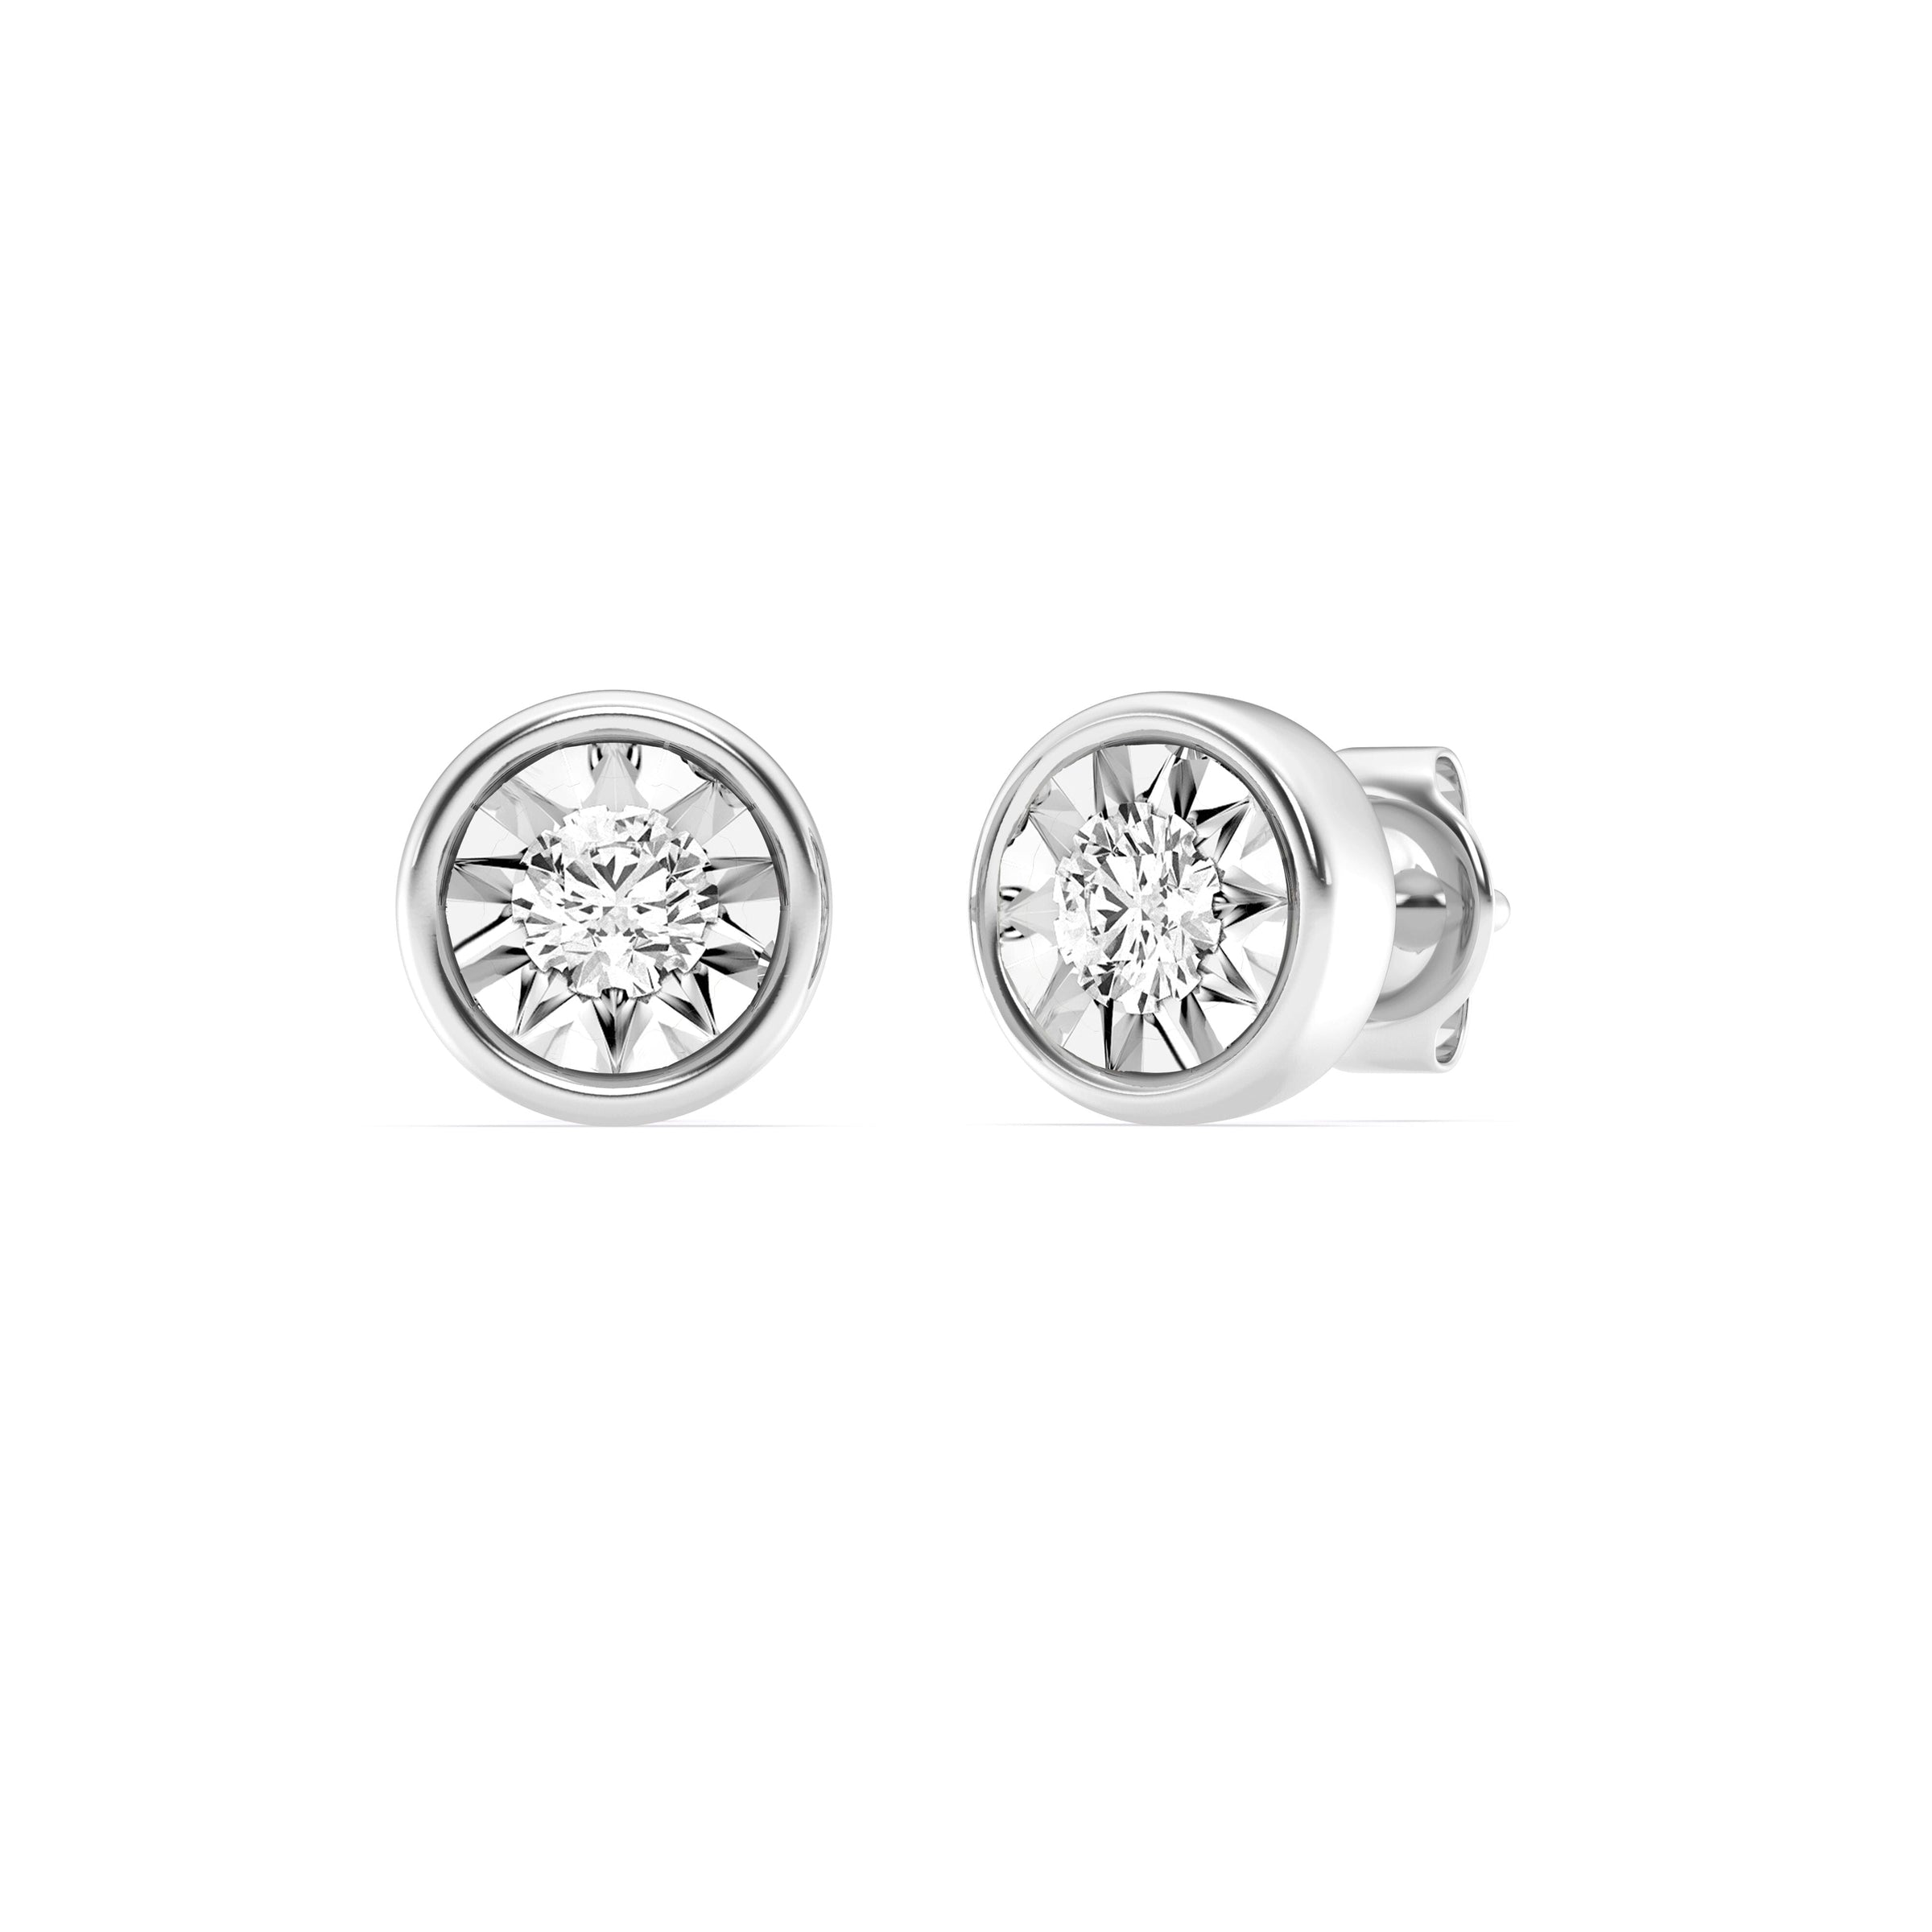 Mirage Stud Earrings with 1.00ct of Laboratory Grown Diamonds in Sterling Silver and Platinum Earrings Bevilles 